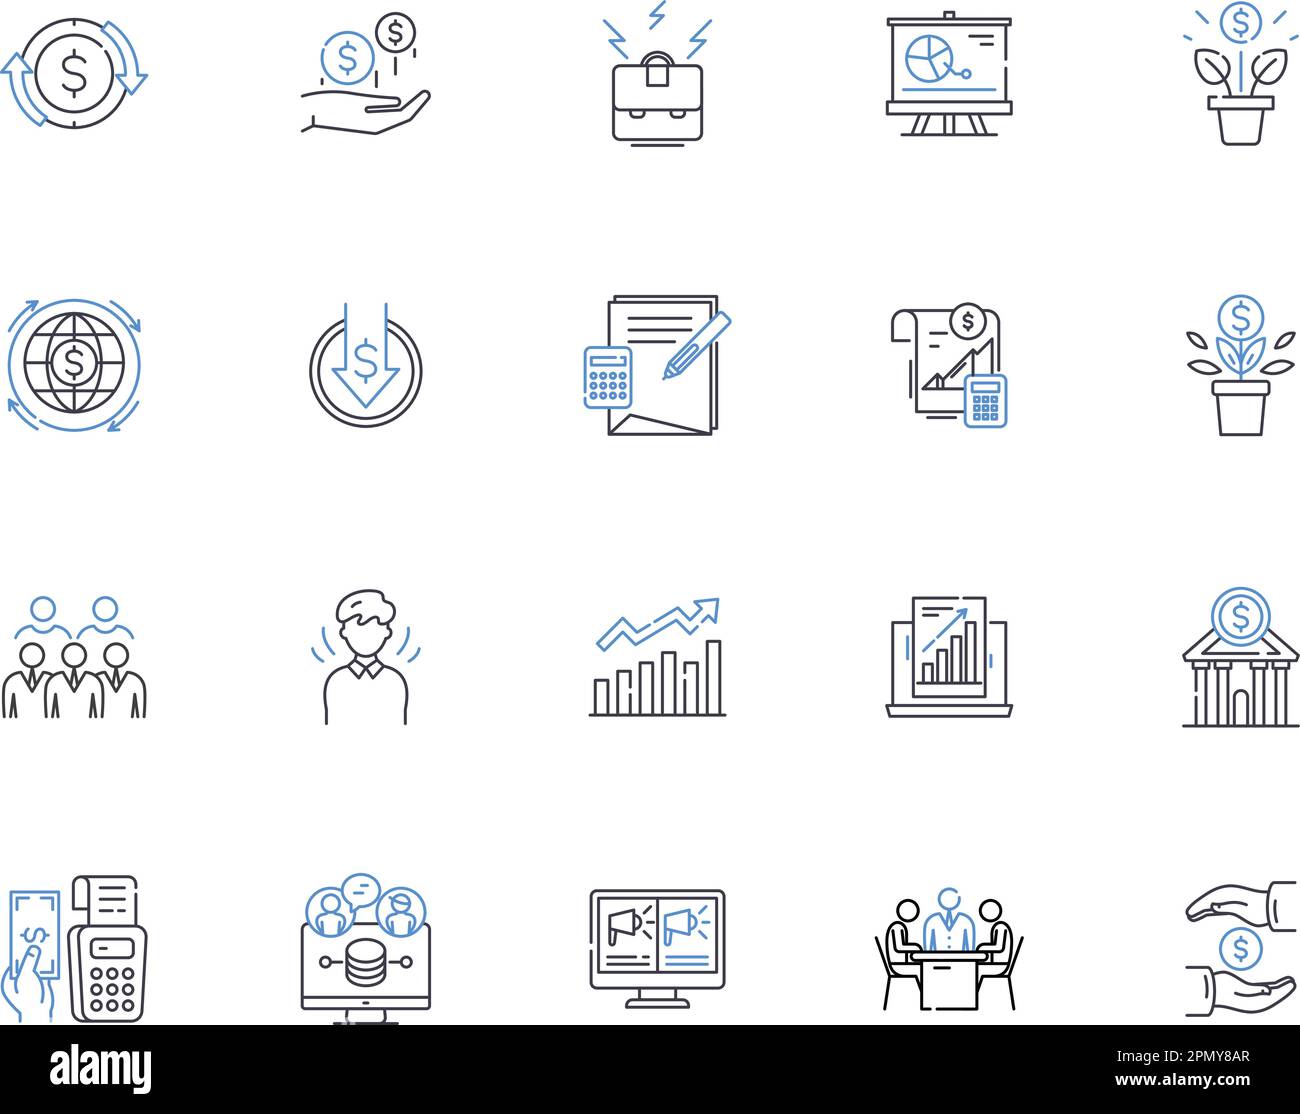 Accounting outline icons collection. Accounting, Bookkeeping, Reconciliation, Budgeting, Auditing, Taxes, CPA vector and illustration concept set Stock Vector